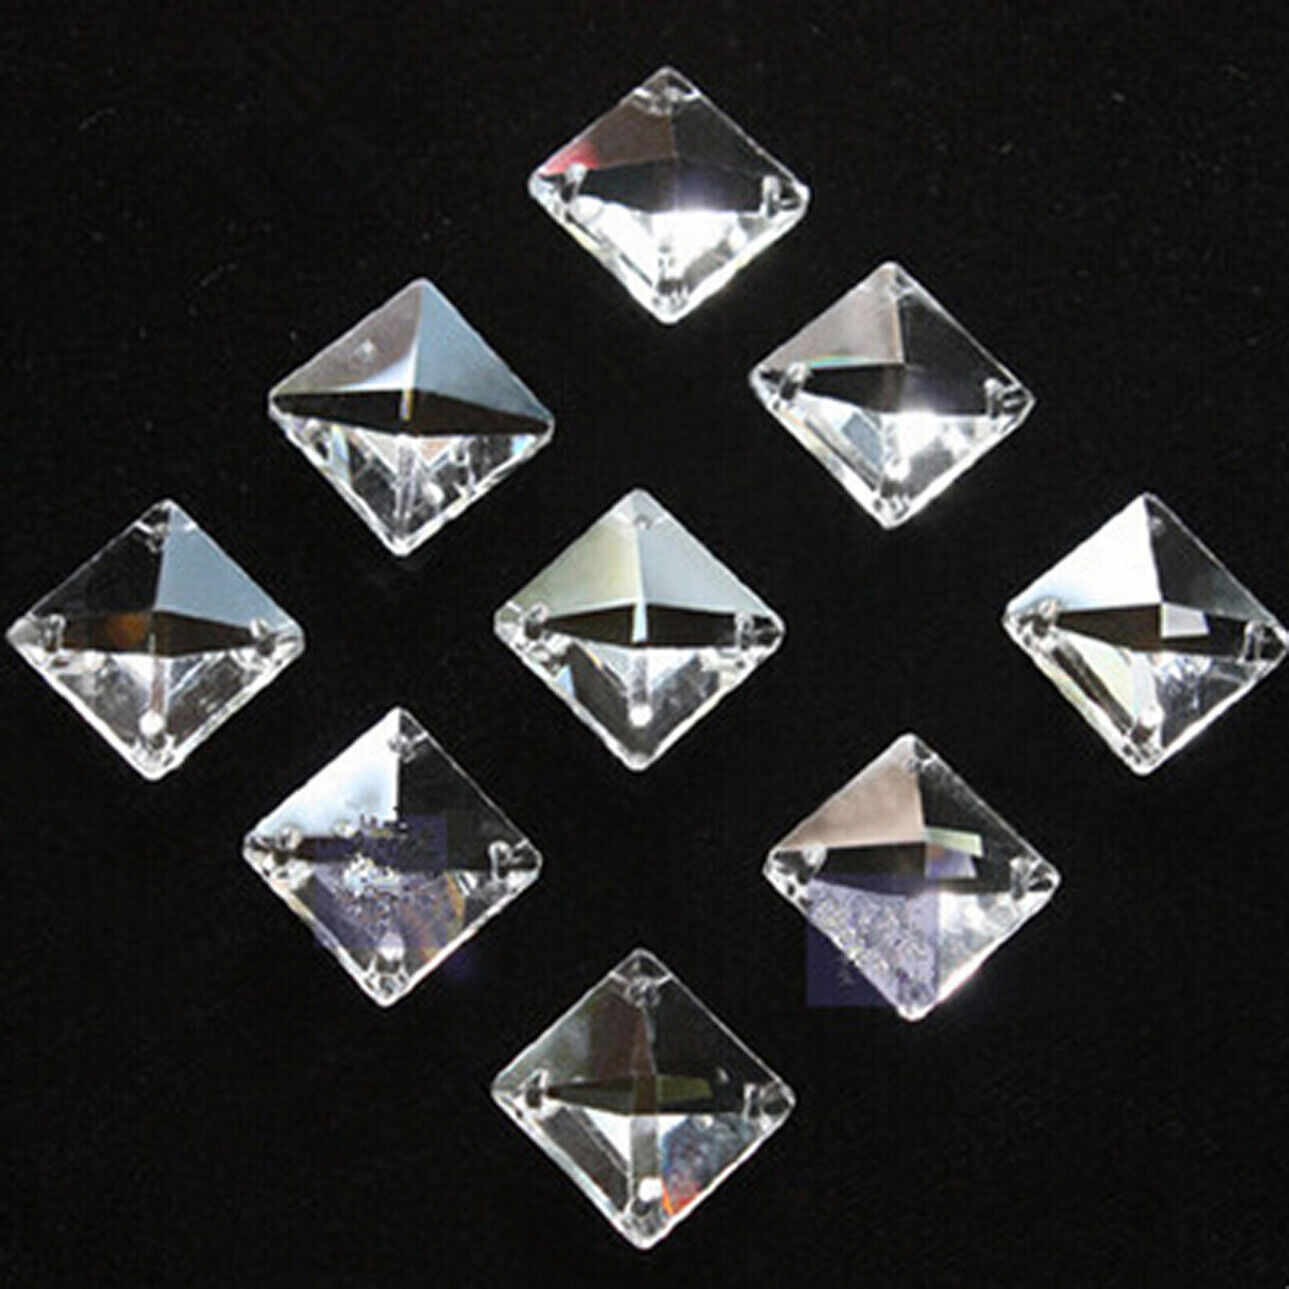 100pcs 14mm Clear Glass Square Crystal Beads Prisms Chandelier Lamp Chain Parts